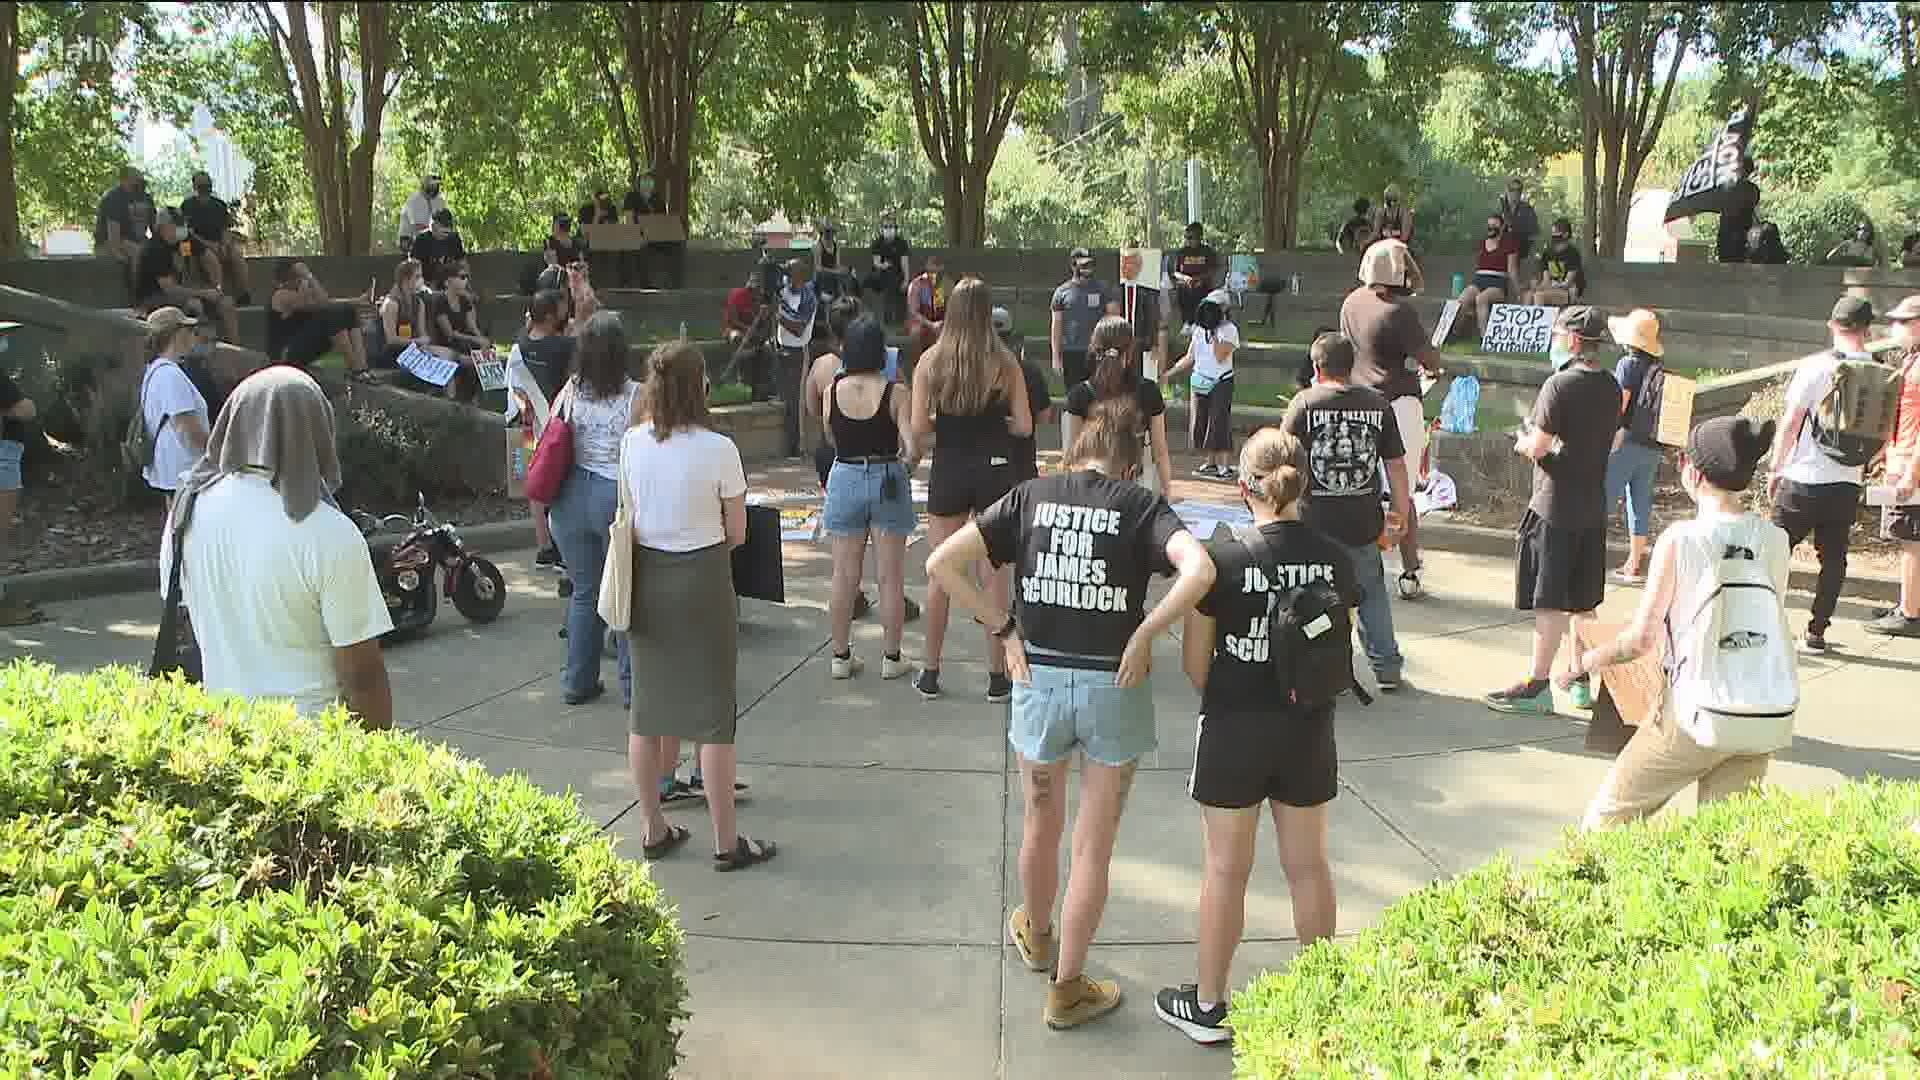 Dozens showed up to Ebenezer Baptist Church as part of an organized protest on Saturday.